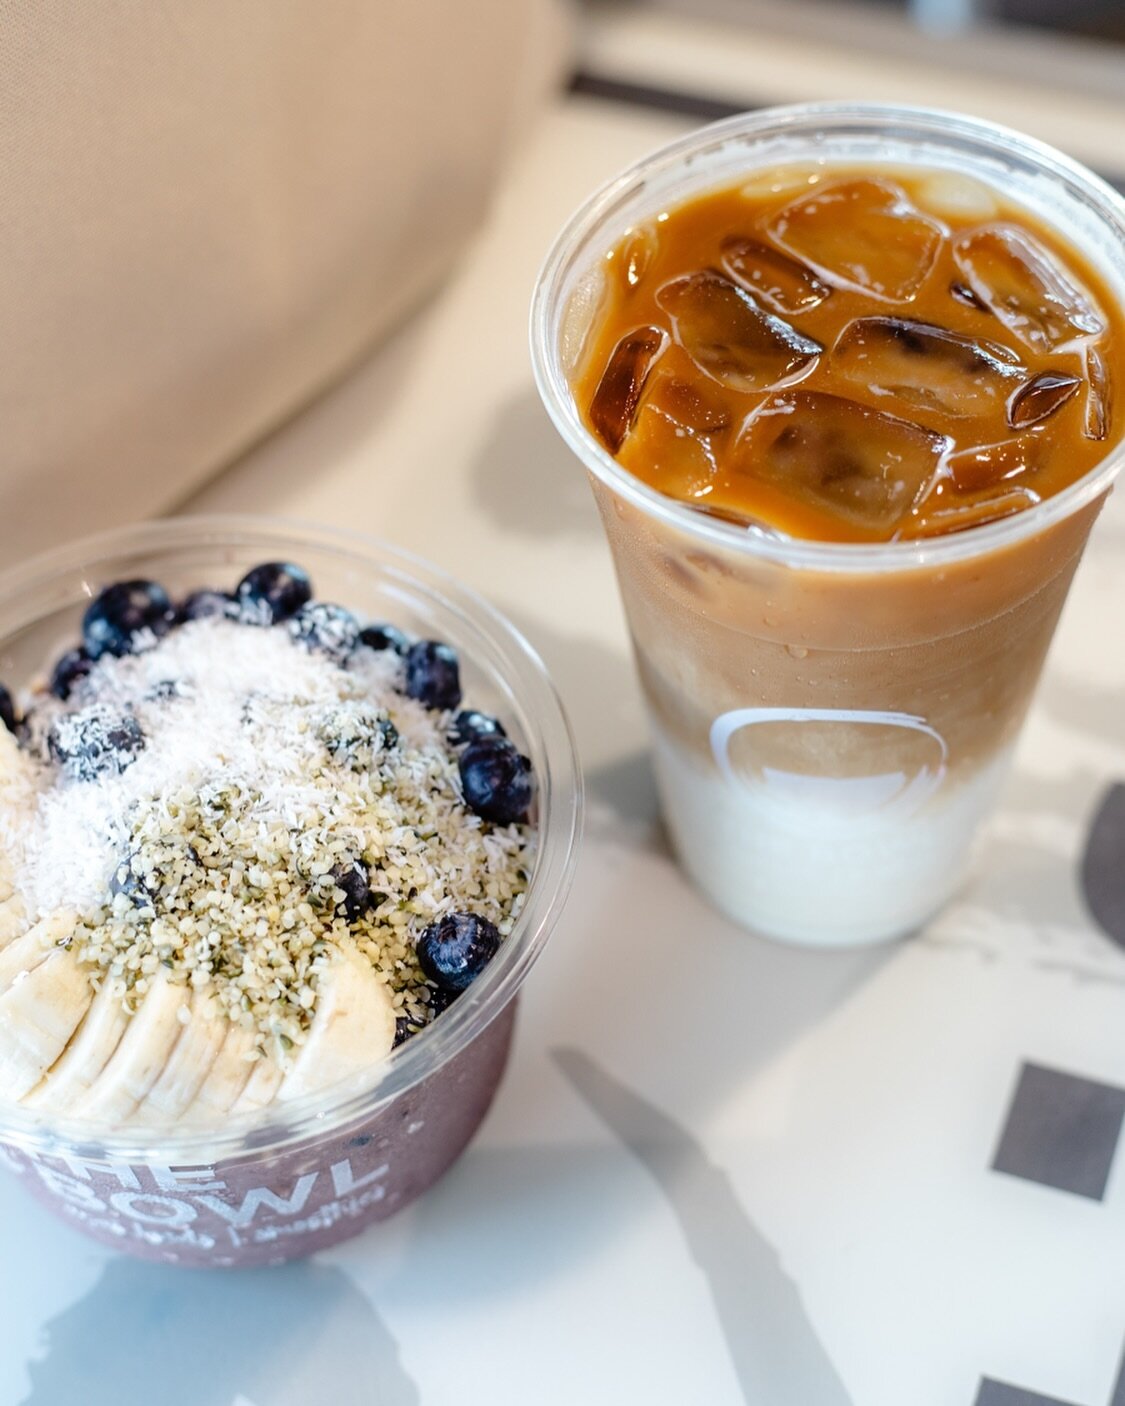 Every mornings a latte and acai bowl morning over here. 🤪 Get your espresso beverages over at our Central Ave location all day everyday! 

#swflcoffee #swflfoodies #naplescoffee #naplesfl #naplesfloridafoodie #swflbloggers